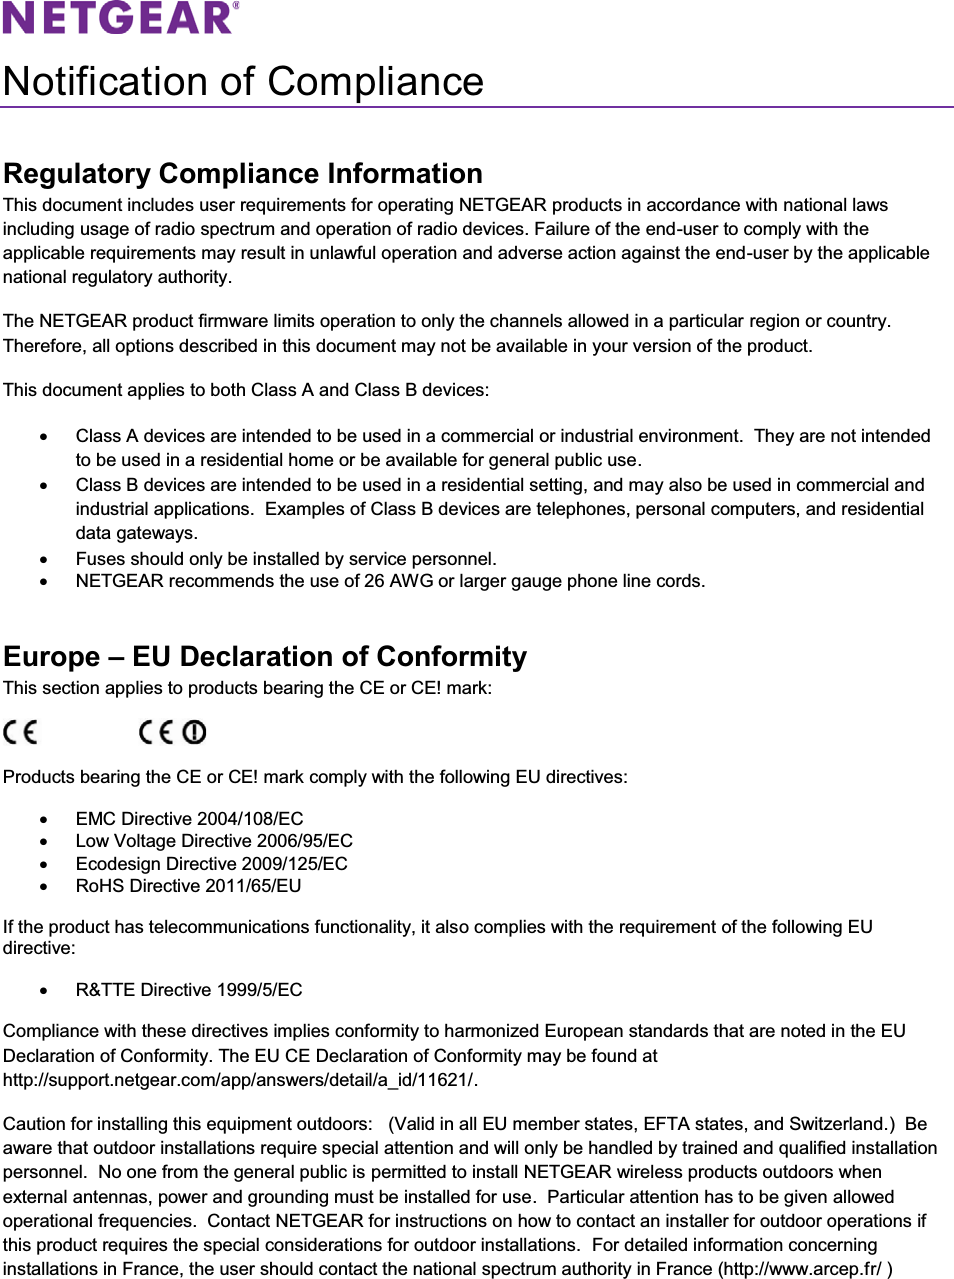   Notification of Compliance Regulatory Compliance Information This document includes user requirements for operating NETGEAR products in accordance with national laws including usage of radio spectrum and operation of radio devices. Failure of the end-user to comply with the applicable requirements may result in unlawful operation and adverse action against the end-user by the applicable national regulatory authority. The NETGEAR product firmware limits operation to only the channels allowed in a particular region or country. Therefore, all options described in this document may not be available in your version of the product. This document applies to both Class A and Class B devices: x  Class A devices are intended to be used in a commercial or industrial environment.  They are not intended to be used in a residential home or be available for general public use. x  Class B devices are intended to be used in a residential setting, and may also be used in commercial and industrial applications.  Examples of Class B devices are telephones, personal computers, and residential data gateways. x  Fuses should only be installed by service personnel. x  NETGEAR recommends the use of 26 AWG or larger gauge phone line cords. Europe – EU Declaration of Conformity This section applies to products bearing the CE or CE! mark:                      Products bearing the CE or CE! mark comply with the following EU directives: x  EMC Directive 2004/108/EC x  Low Voltage Directive 2006/95/EC x Ecodesign Directive 2009/125/EC x  RoHS Directive 2011/65/EU If the product has telecommunications functionality, it also complies with the requirement of the following EU directive: x  R&amp;TTE Directive 1999/5/EC Compliance with these directives implies conformity to harmonized European standards that are noted in the EU Declaration of Conformity. The EU CE Declaration of Conformity may be found at http://support.netgear.com/app/answers/detail/a_id/11621/. Caution for installing this equipment outdoors:   (Valid in all EU member states, EFTA states, and Switzerland.)  Be aware that outdoor installations require special attention and will only be handled by trained and qualified installation personnel.  No one from the general public is permitted to install NETGEAR wireless products outdoors when external antennas, power and grounding must be installed for use.  Particular attention has to be given allowed operational frequencies.  Contact NETGEAR for instructions on how to contact an installer for outdoor operations if this product requires the special considerations for outdoor installations.  For detailed information concerning installations in France, the user should contact the national spectrum authority in France (http://www.arcep.fr/ ) 